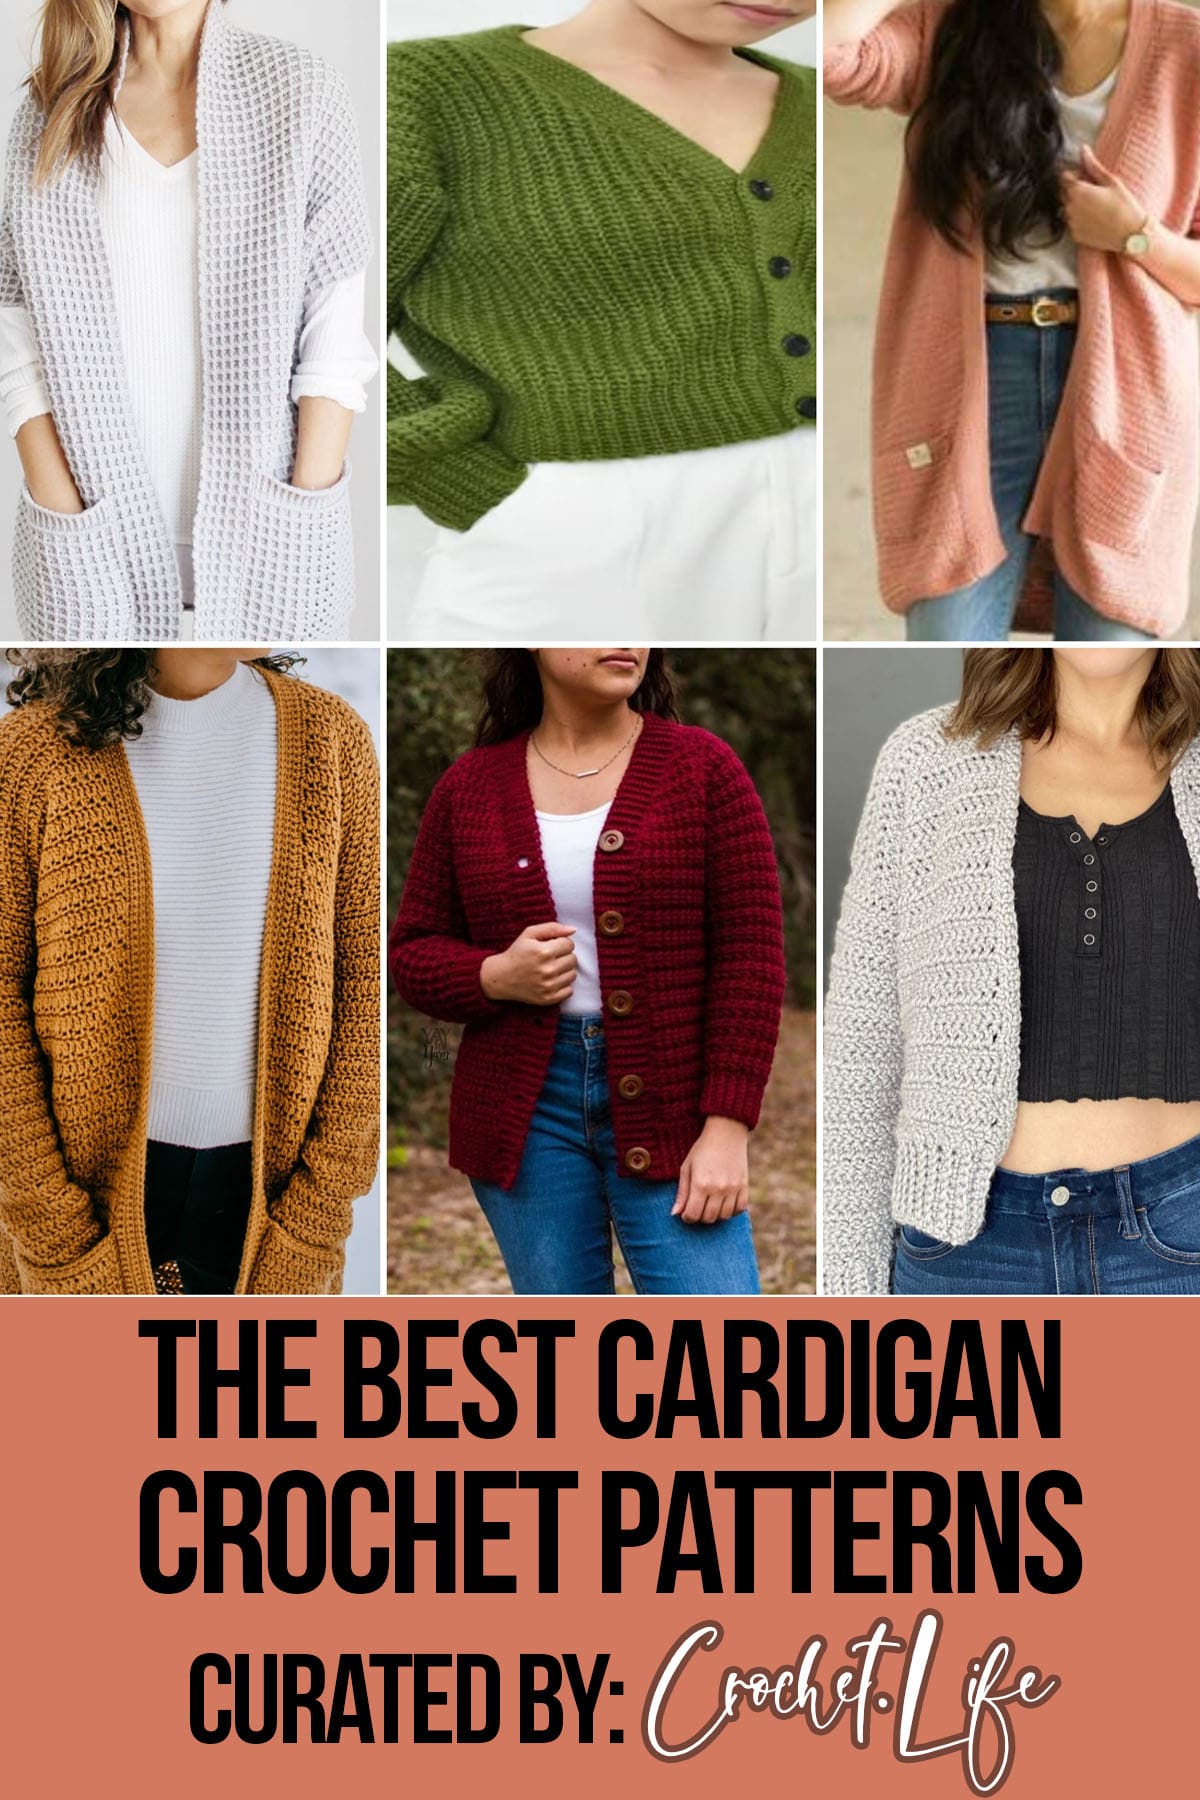 photo collage of easy cardigan patterns for crocheting with text which reads the best cardigan crochet patterns curated by crochet.life